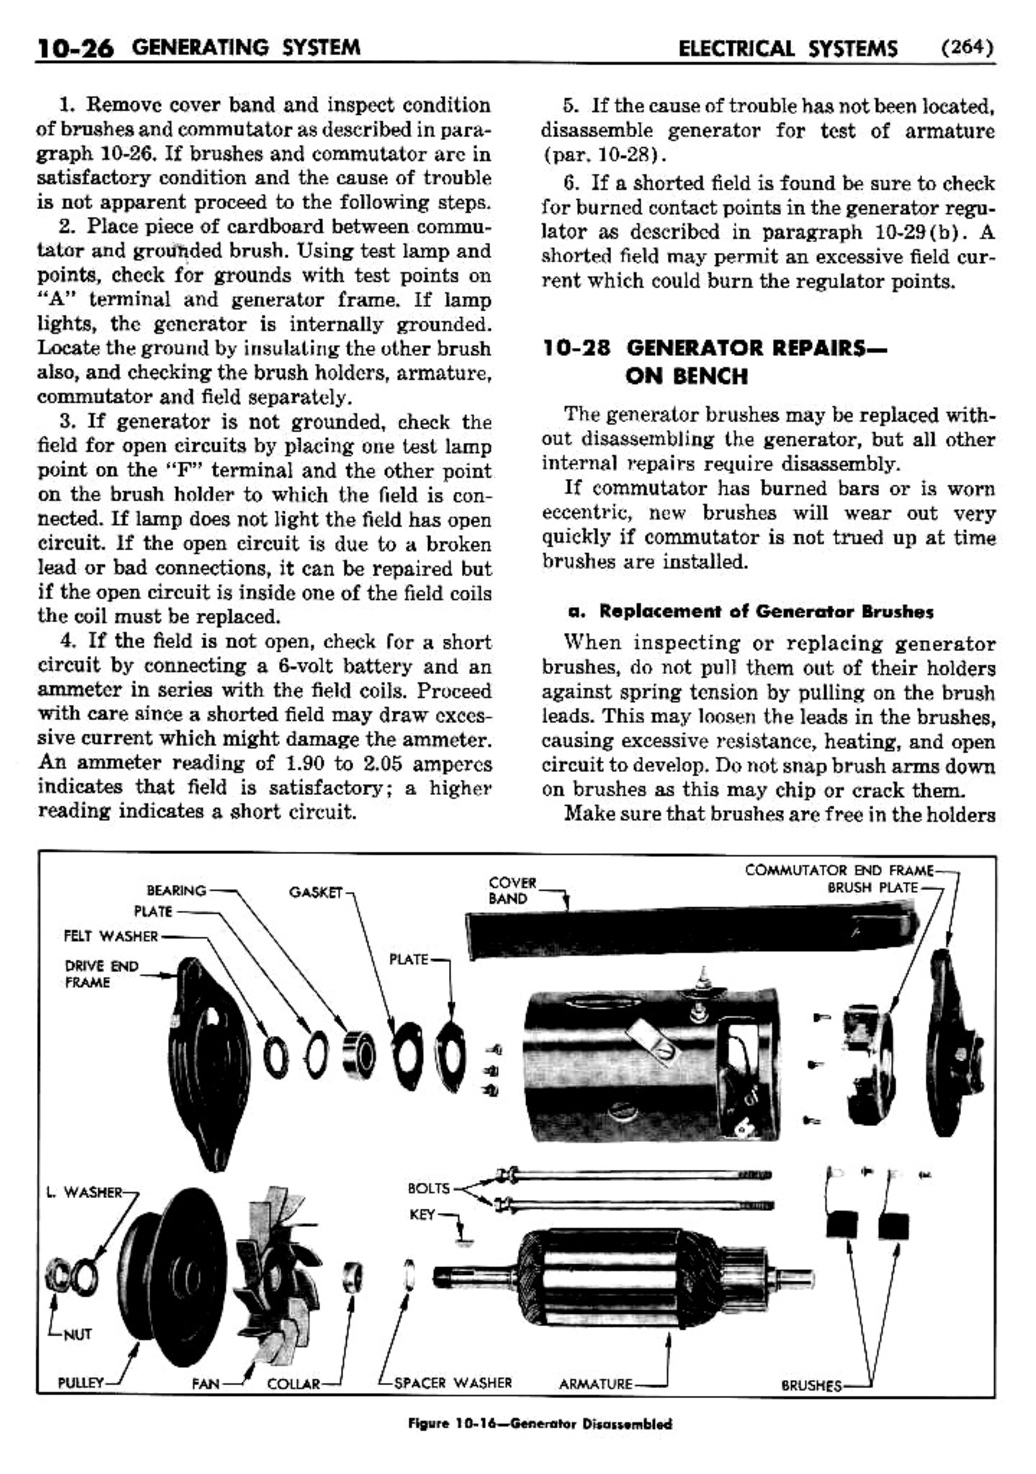 n_11 1950 Buick Shop Manual - Electrical Systems-026-026.jpg